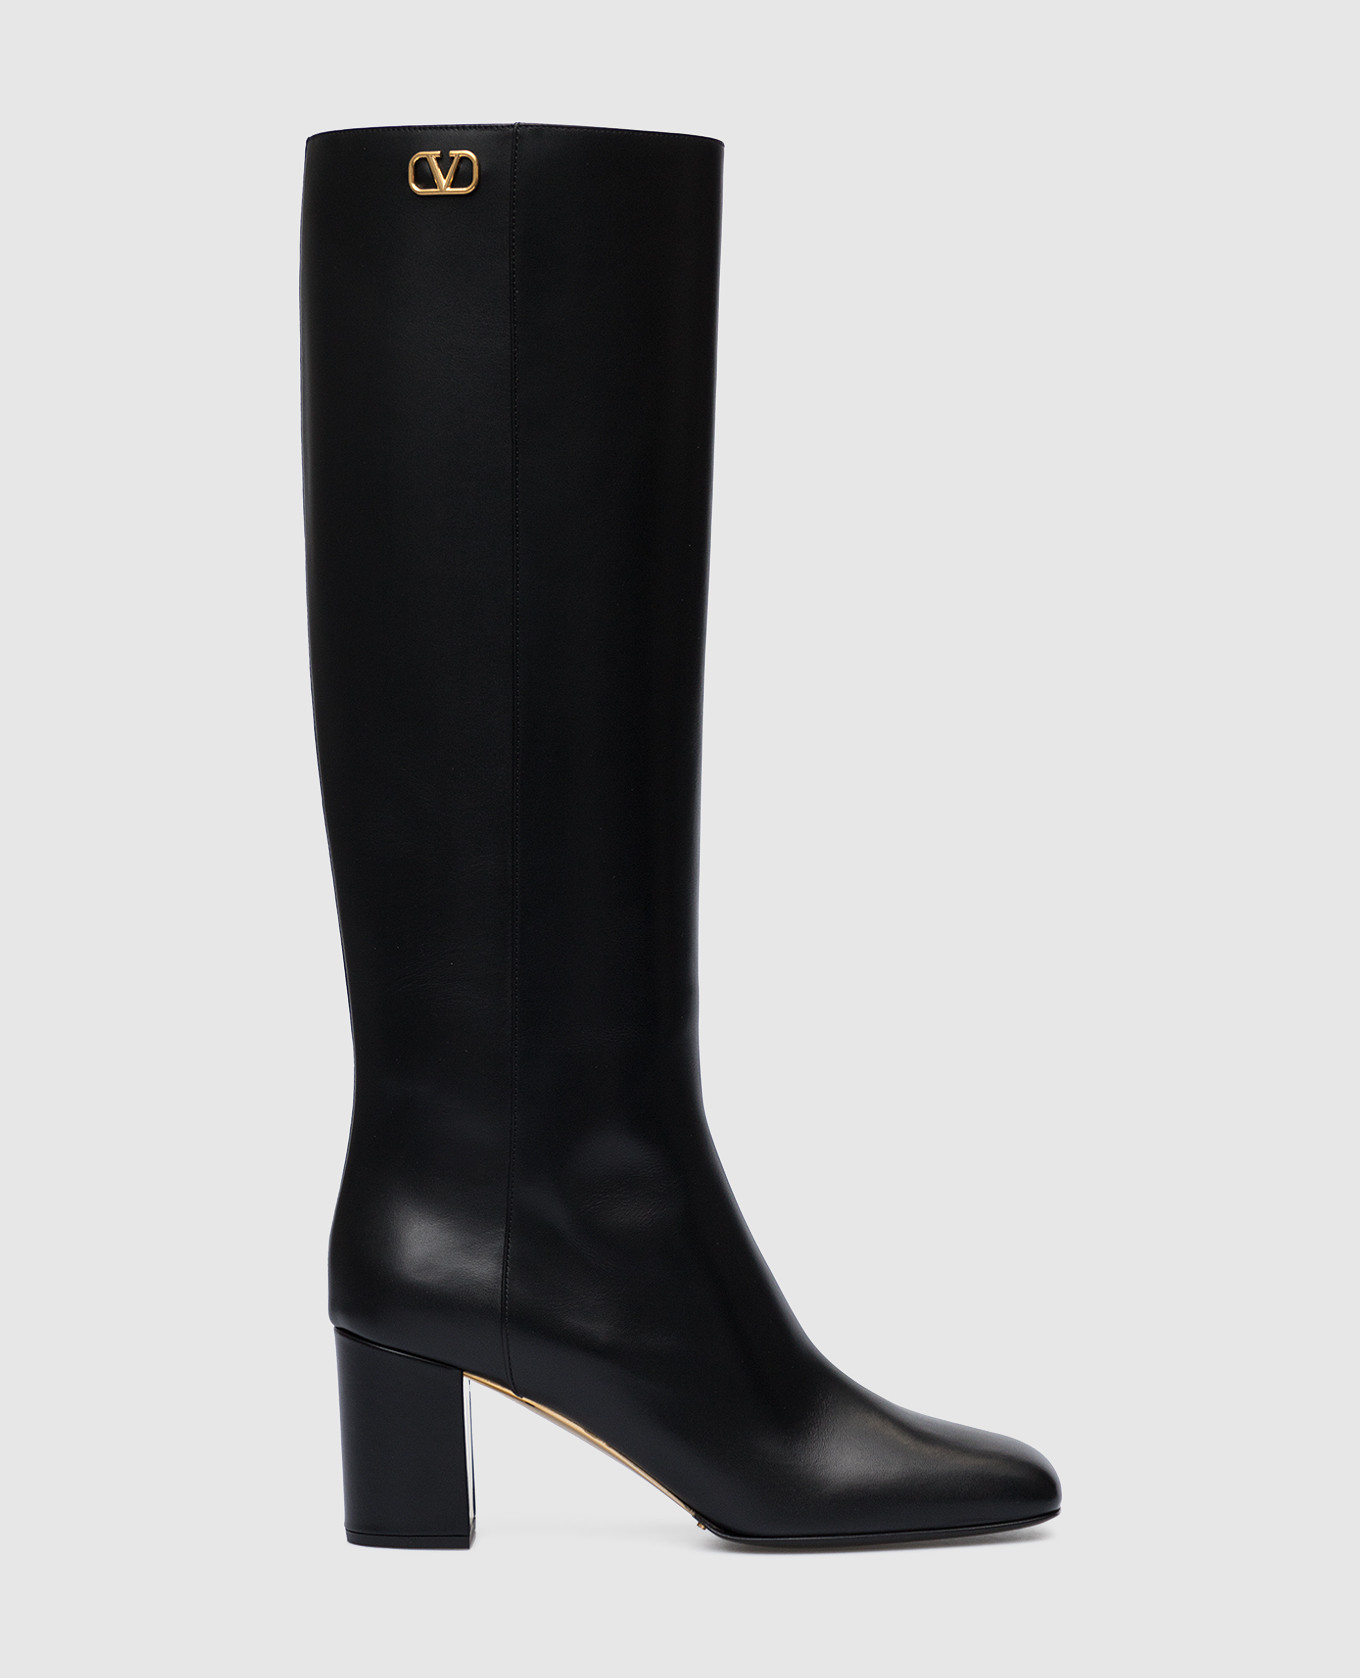 Black leather boots with metal VLogo Signature